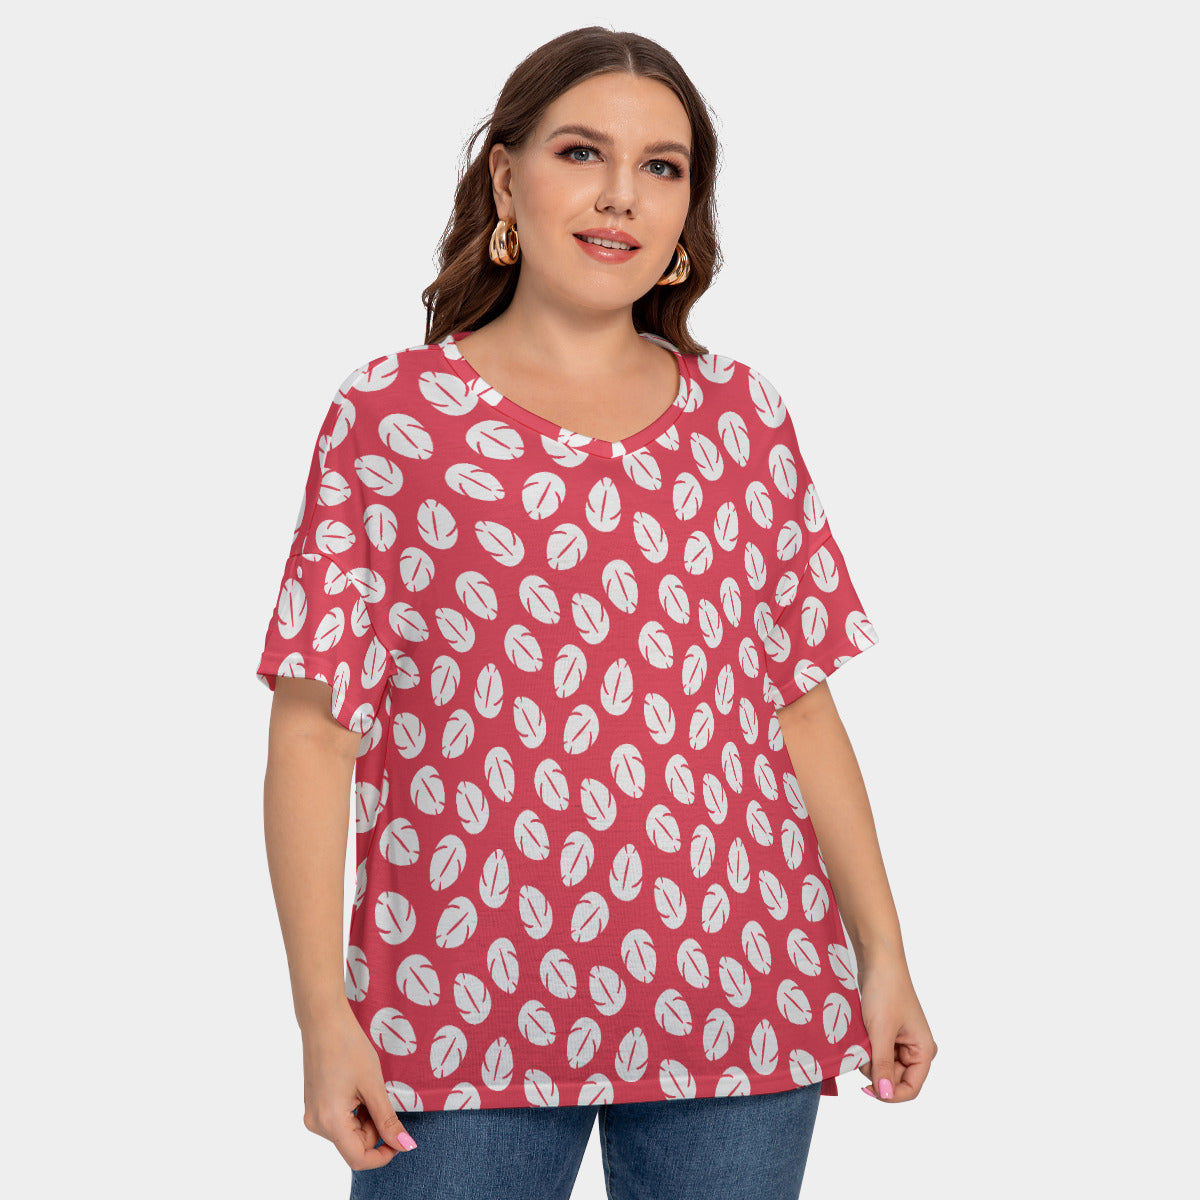 Lilo's Dress Women's Plus Size Short Sleeve T-shirt With Sleeve Loops